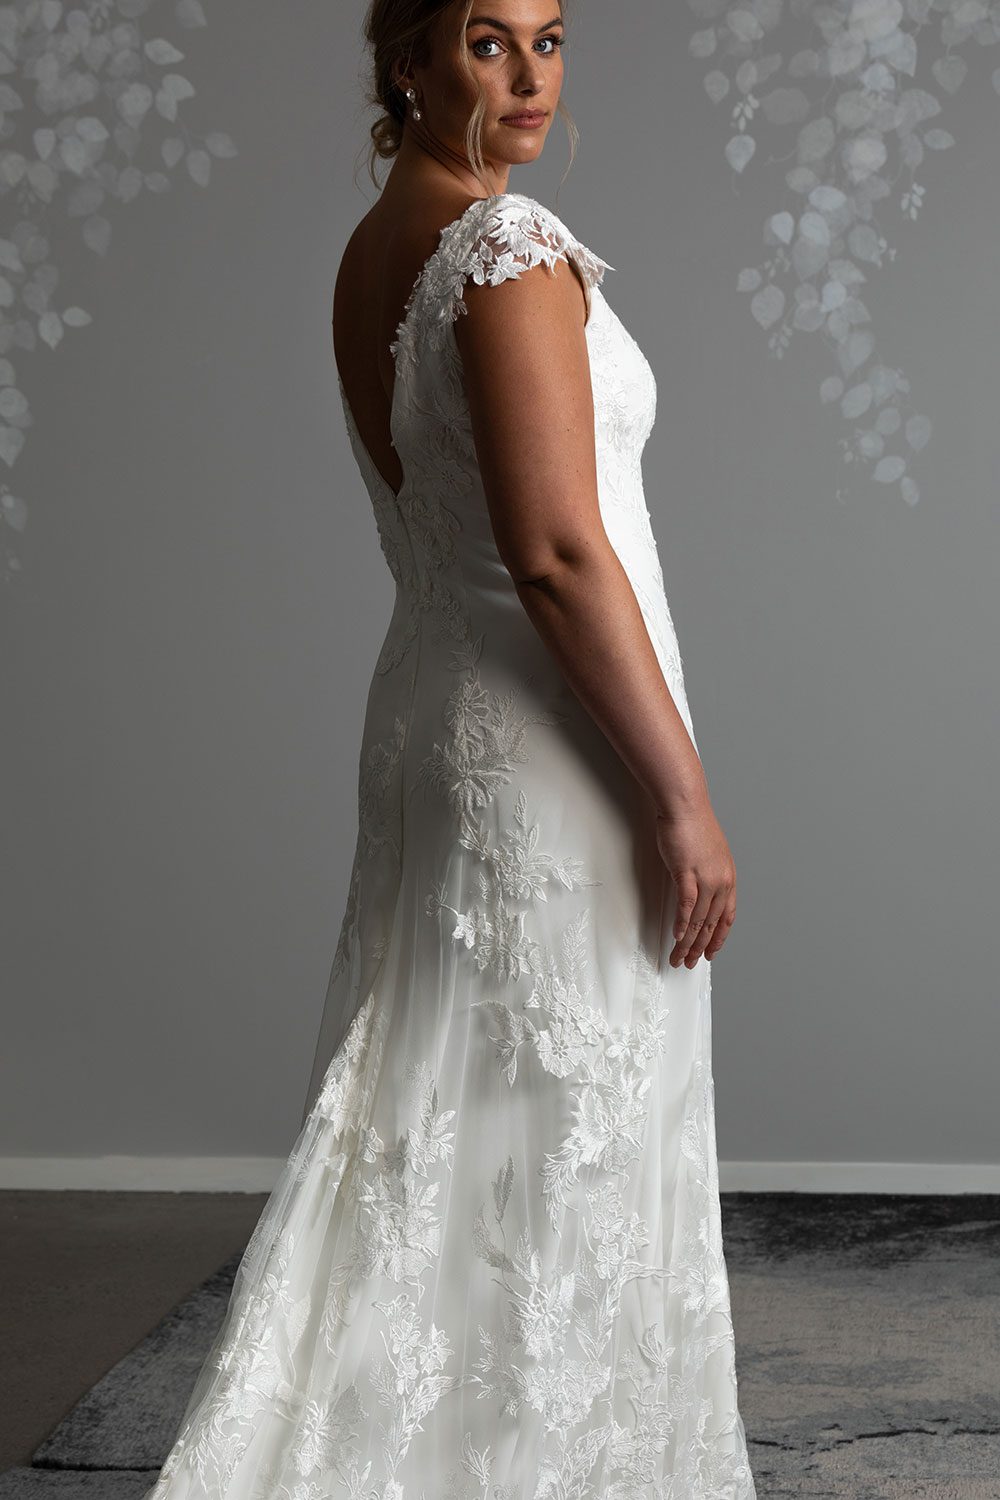 Beautiful A-line wedding gown in stretch satin and botanical lace. Featuring a V-neckline & bodice with intricately hand-appliquéd floral embellishments. Low Back. Vinka Design